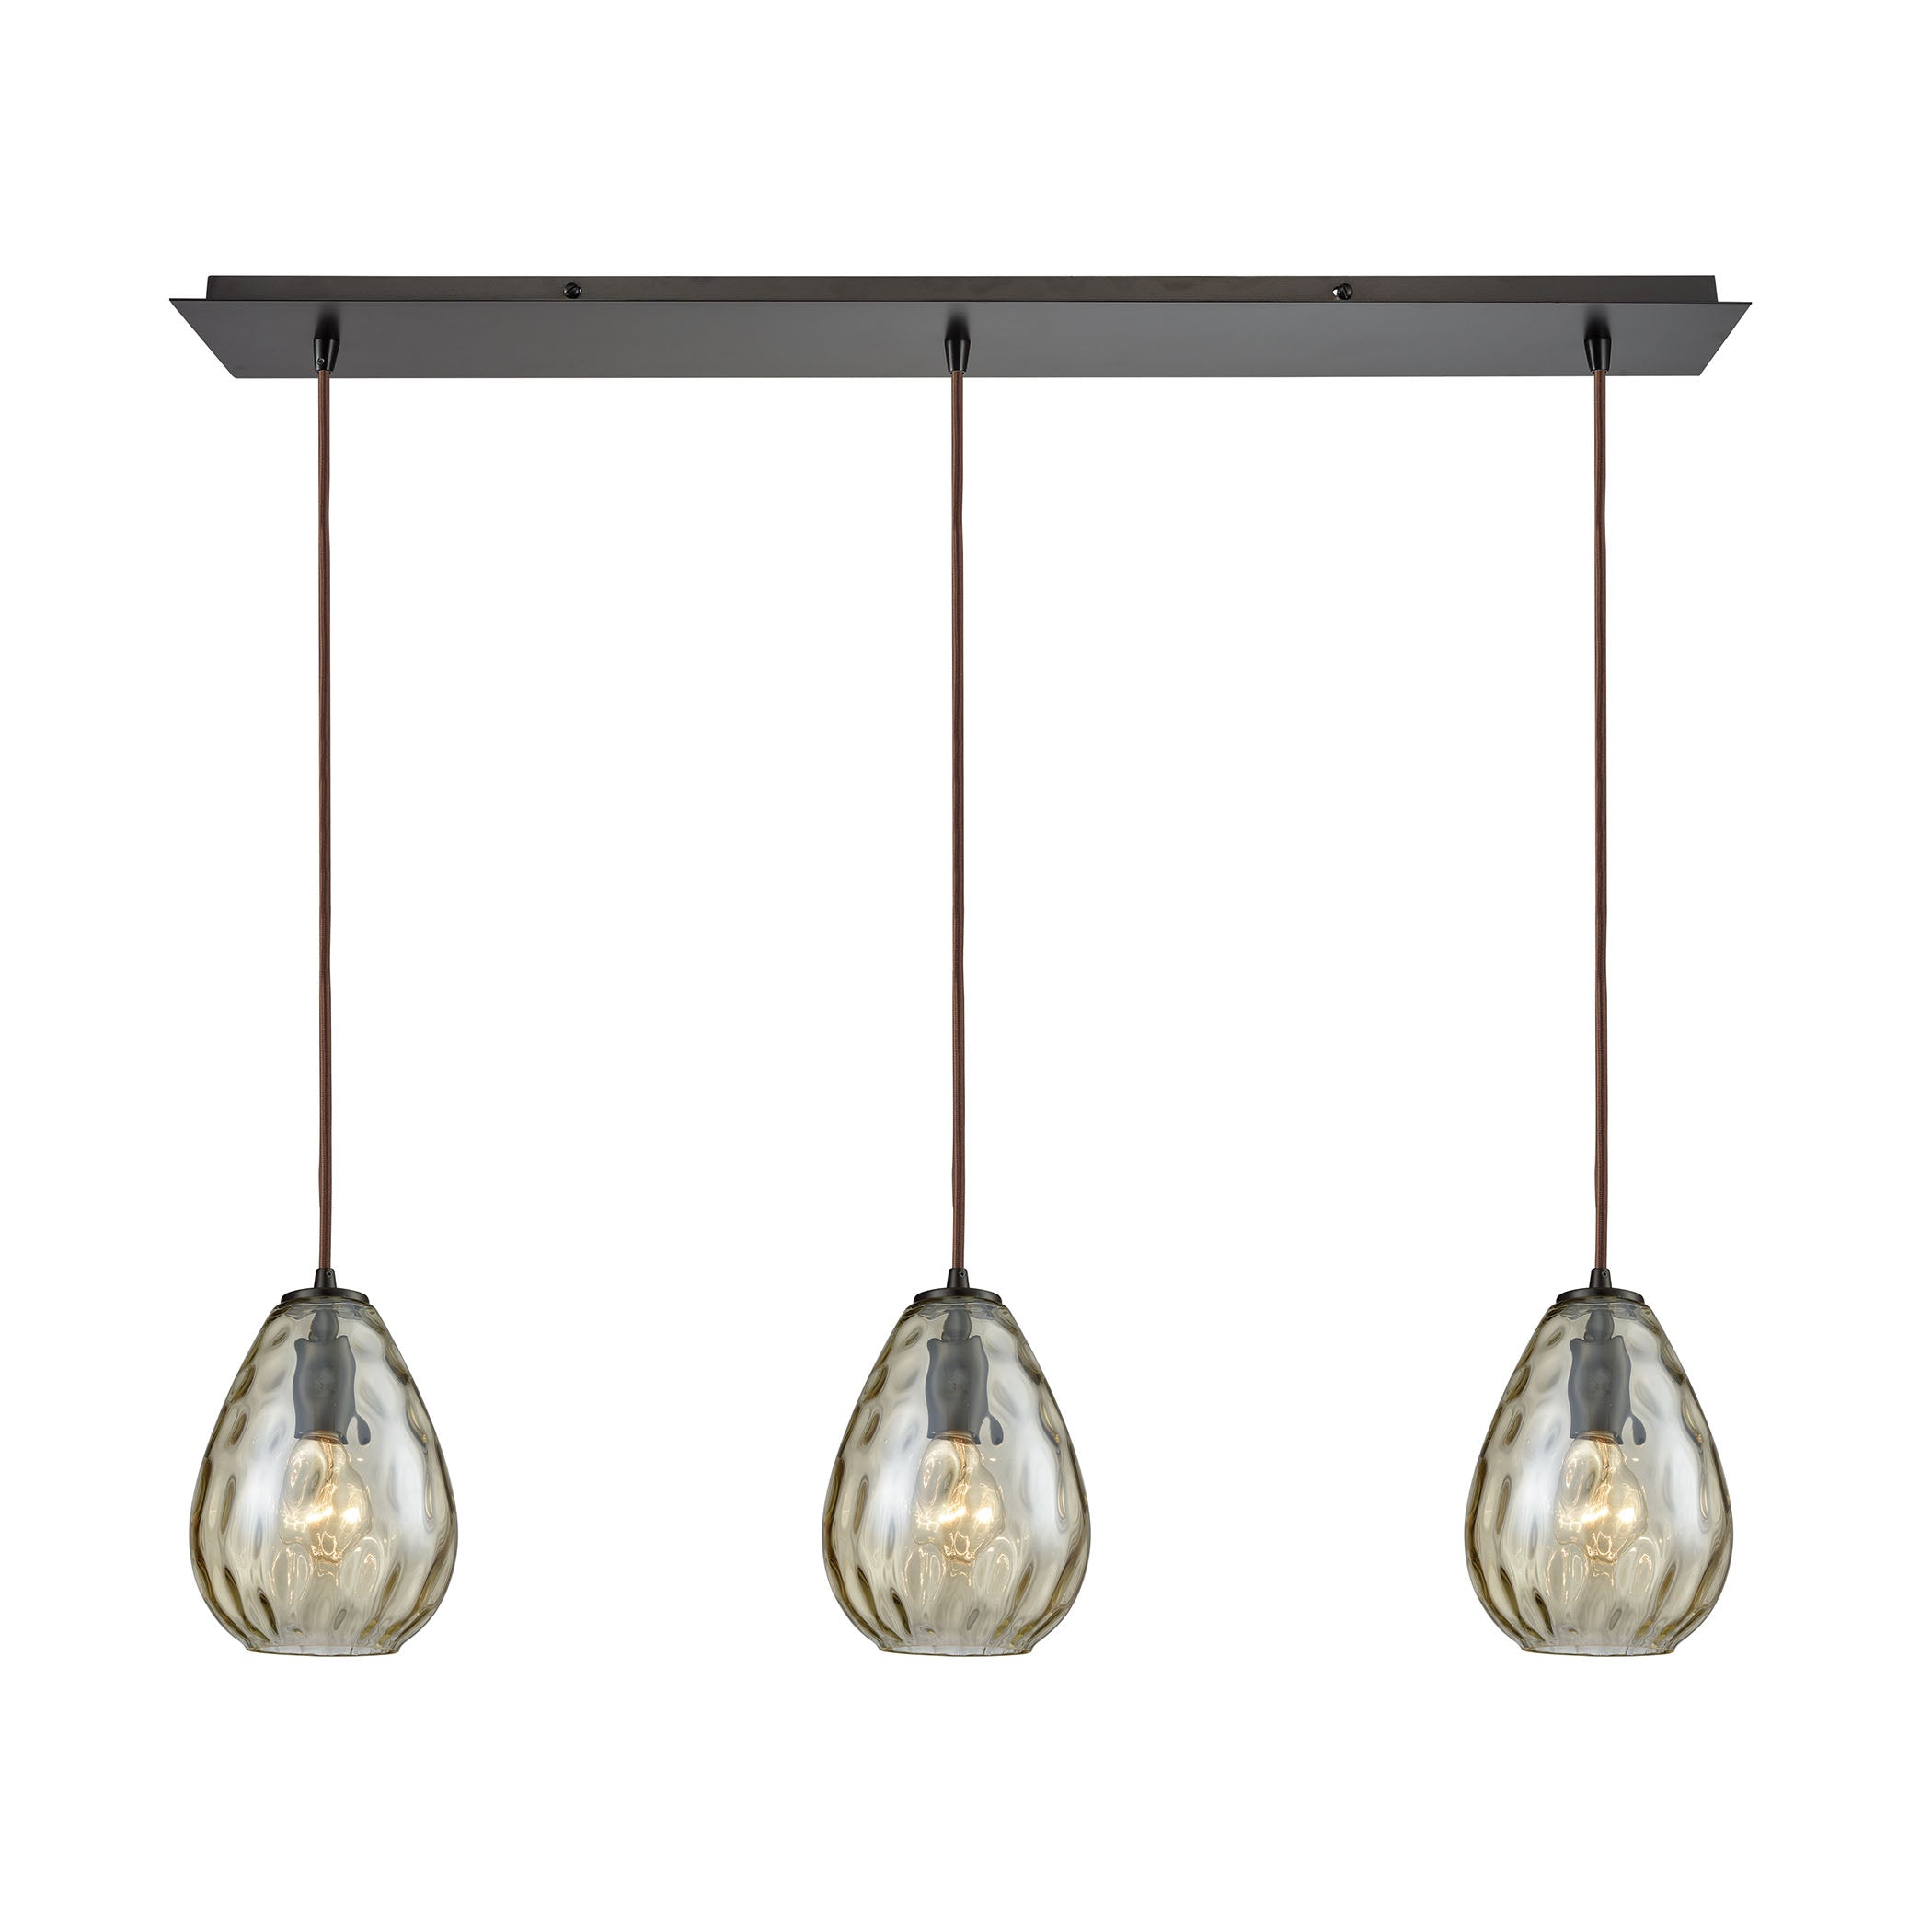 ELK Lighting 10780/3LP Lagoon 3-Light Linear Mini Pendant Fixture in Oil Rubbed Bronze with Champagne-plated Water Glass